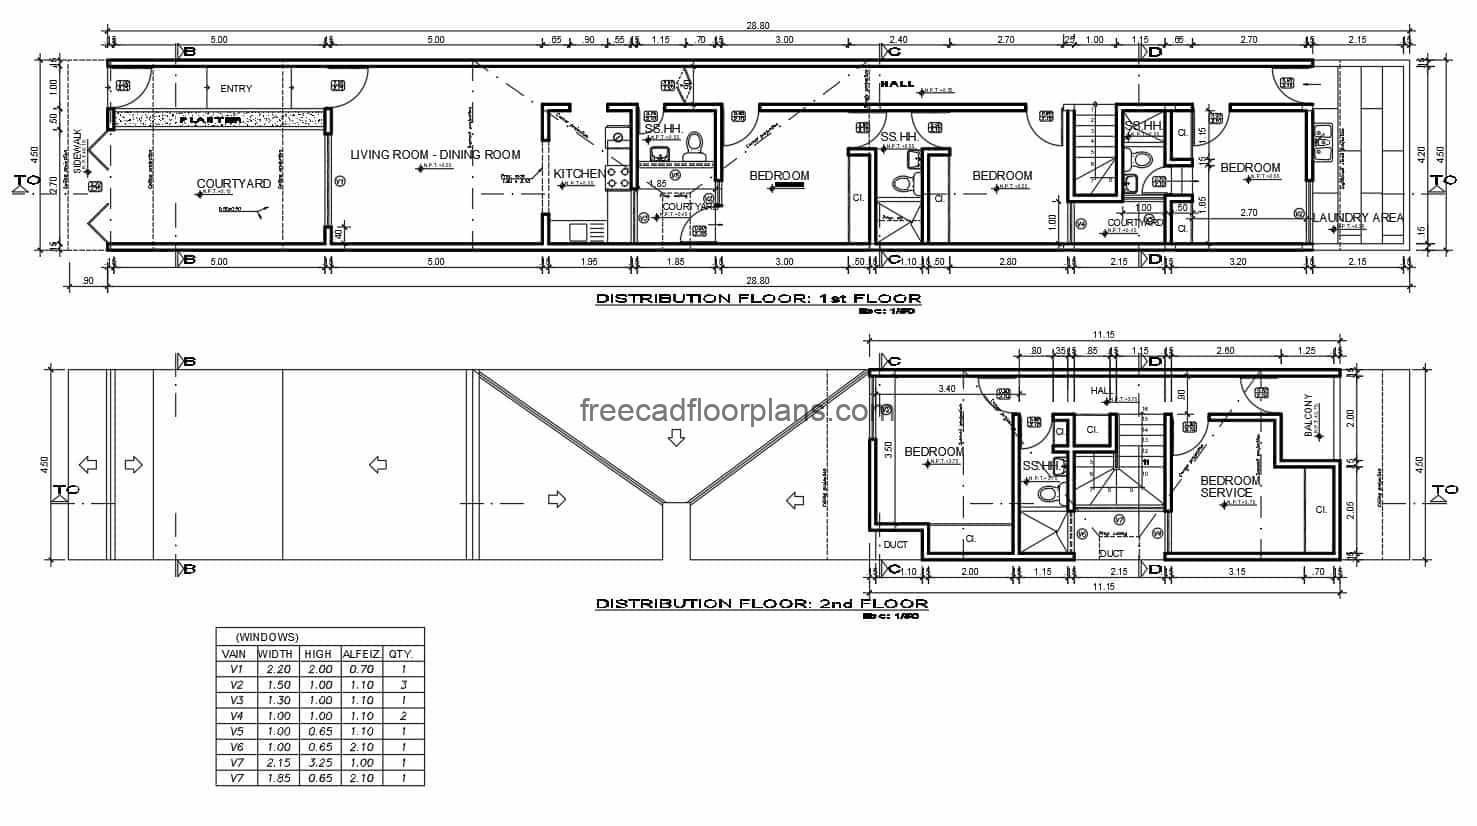 Architectural plans in autocad complete of small elongated house for free download